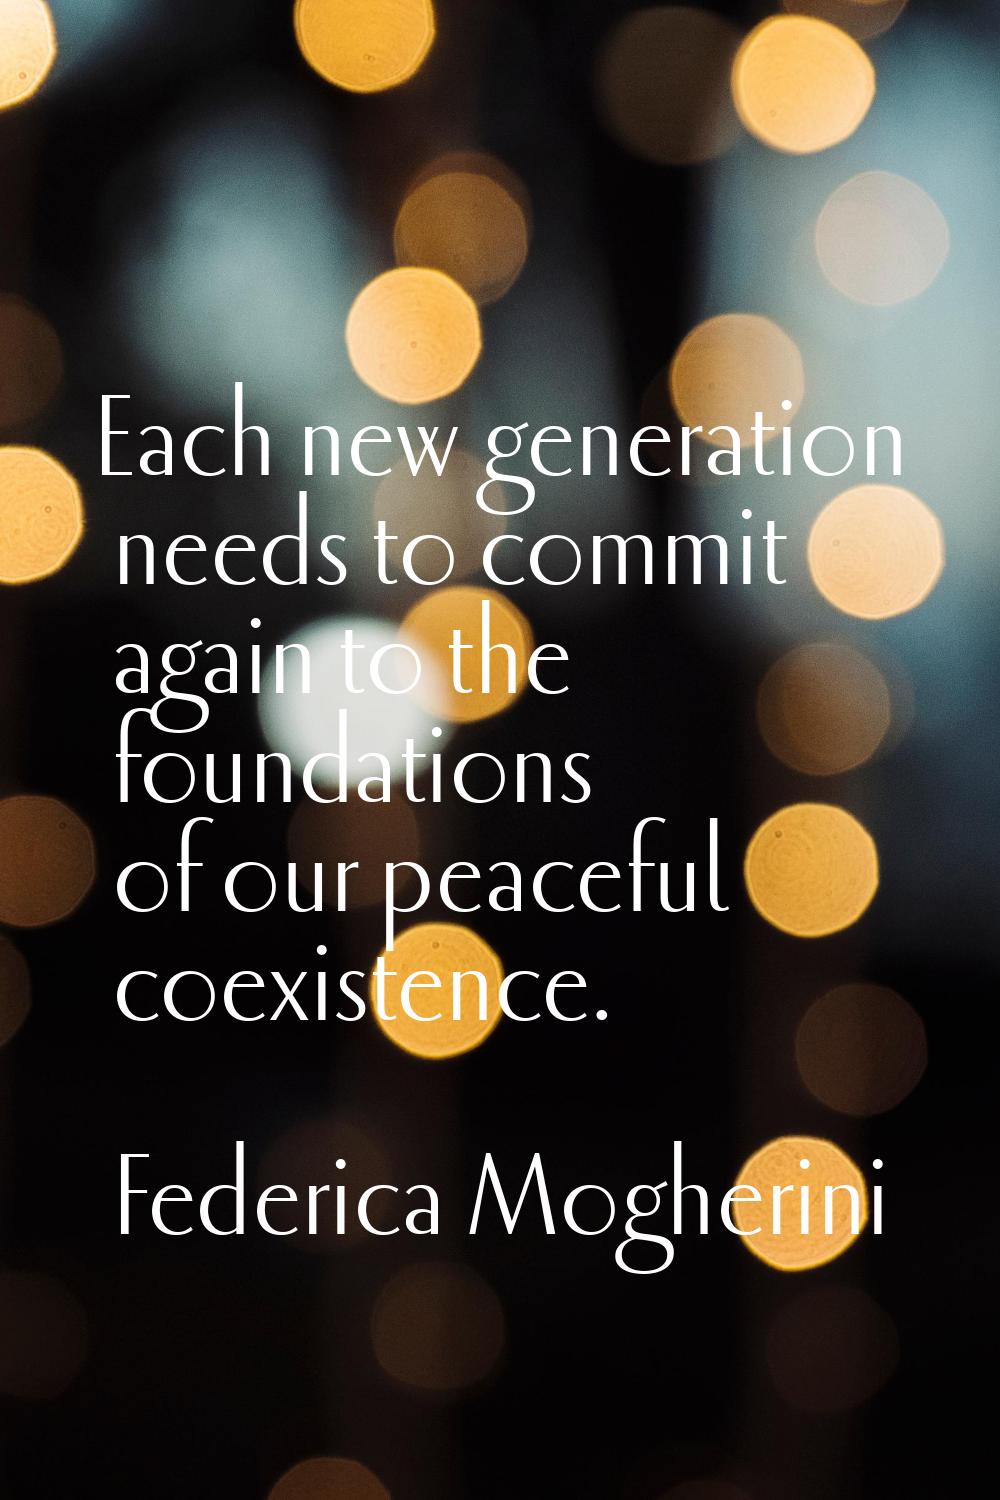 Each new generation needs to commit again to the foundations of our peaceful coexistence.